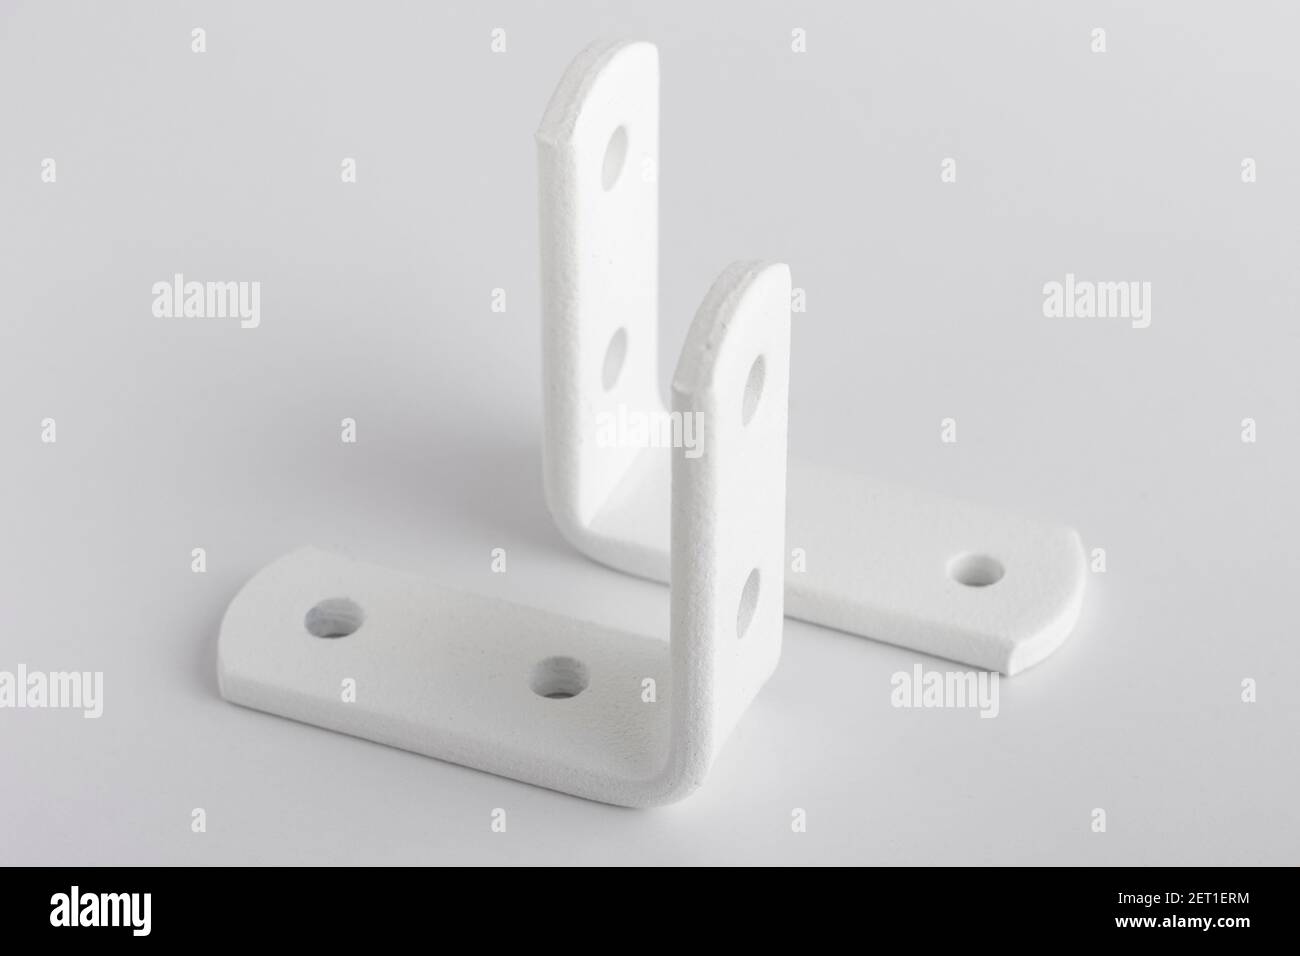 Metal corners for mounting on a white background. corners for fixing cabinets Stock Photo